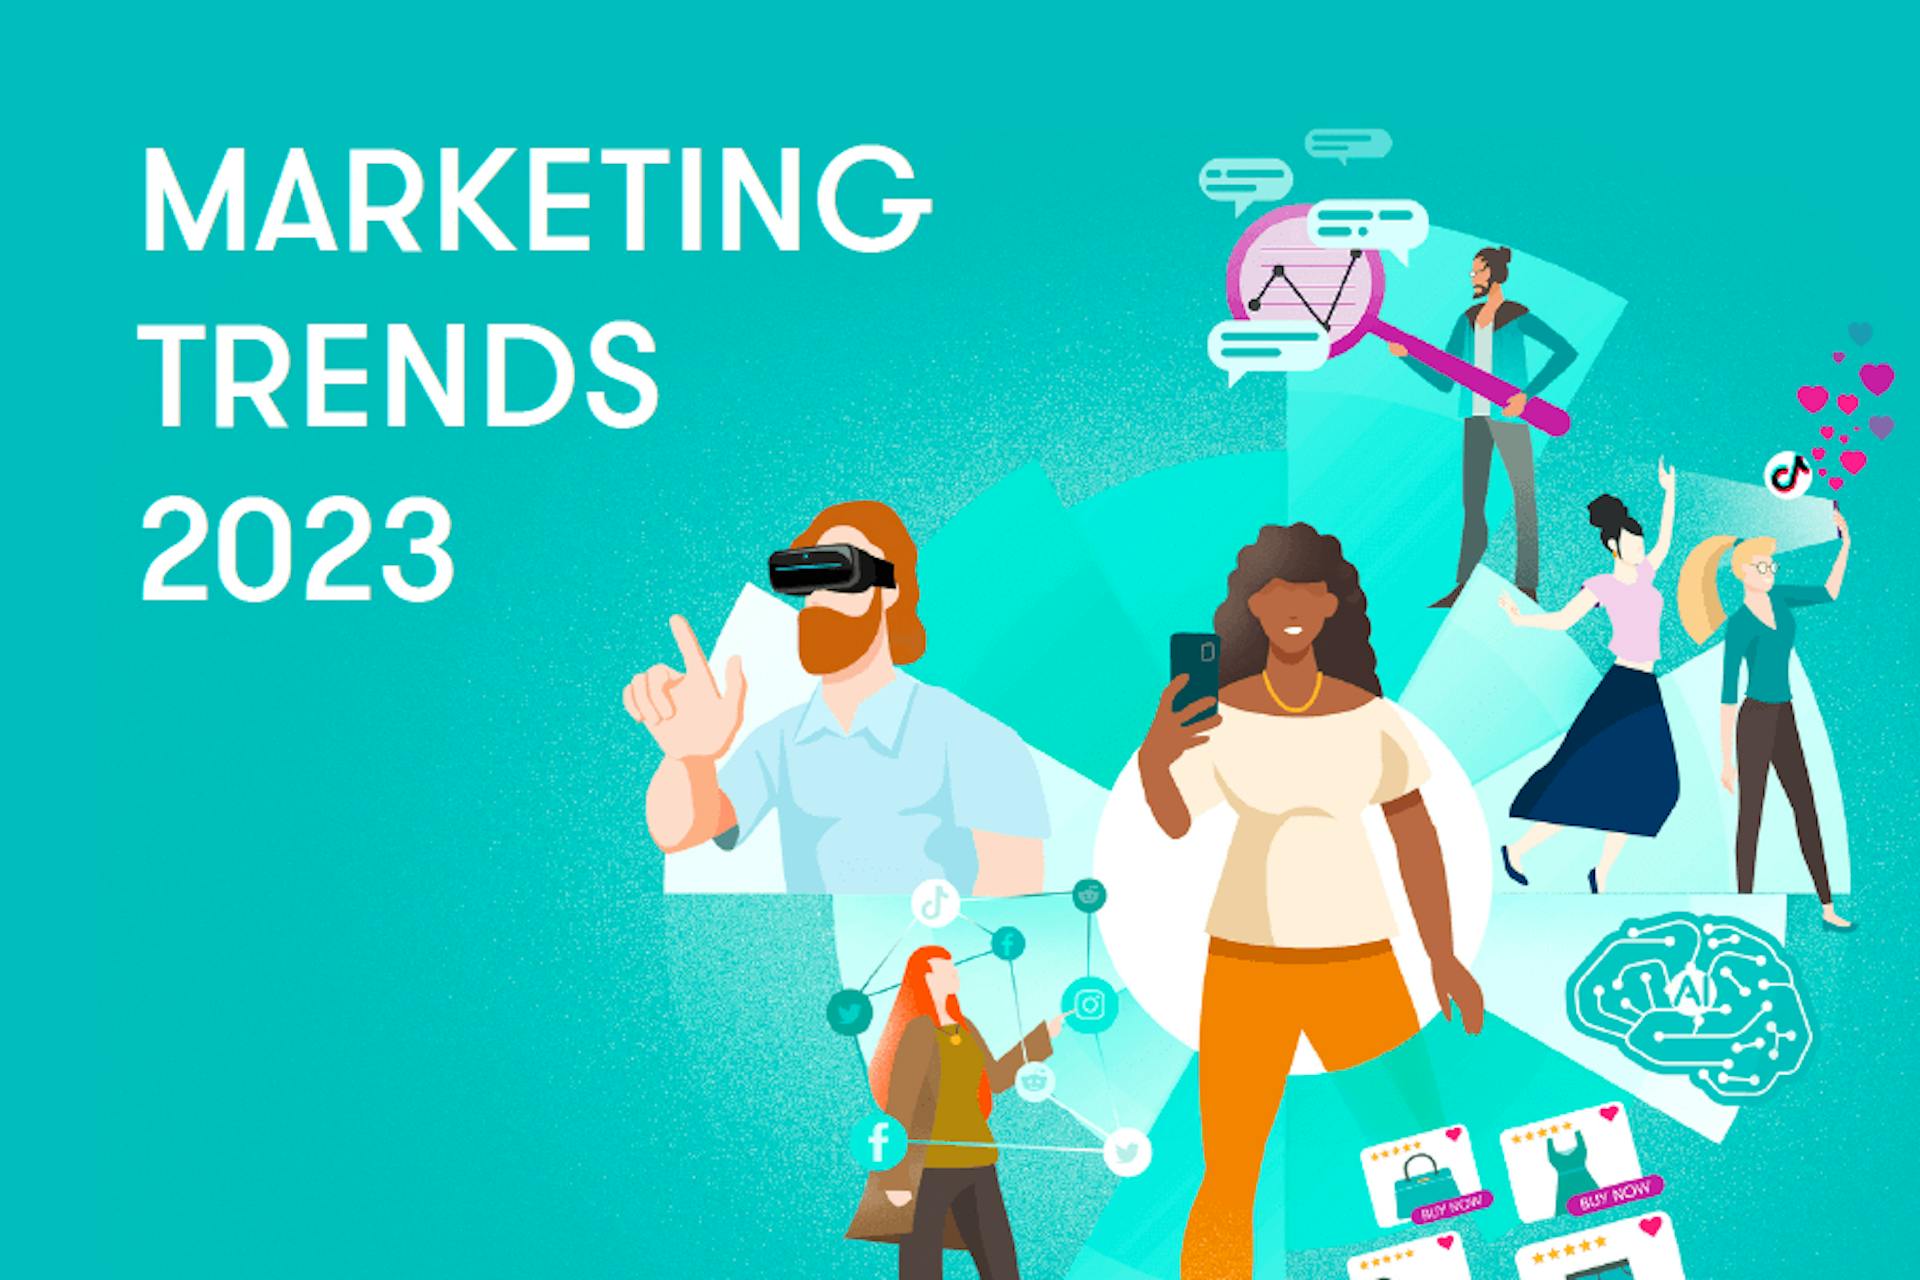 Marketing Trends 2023 Meltwater Cover